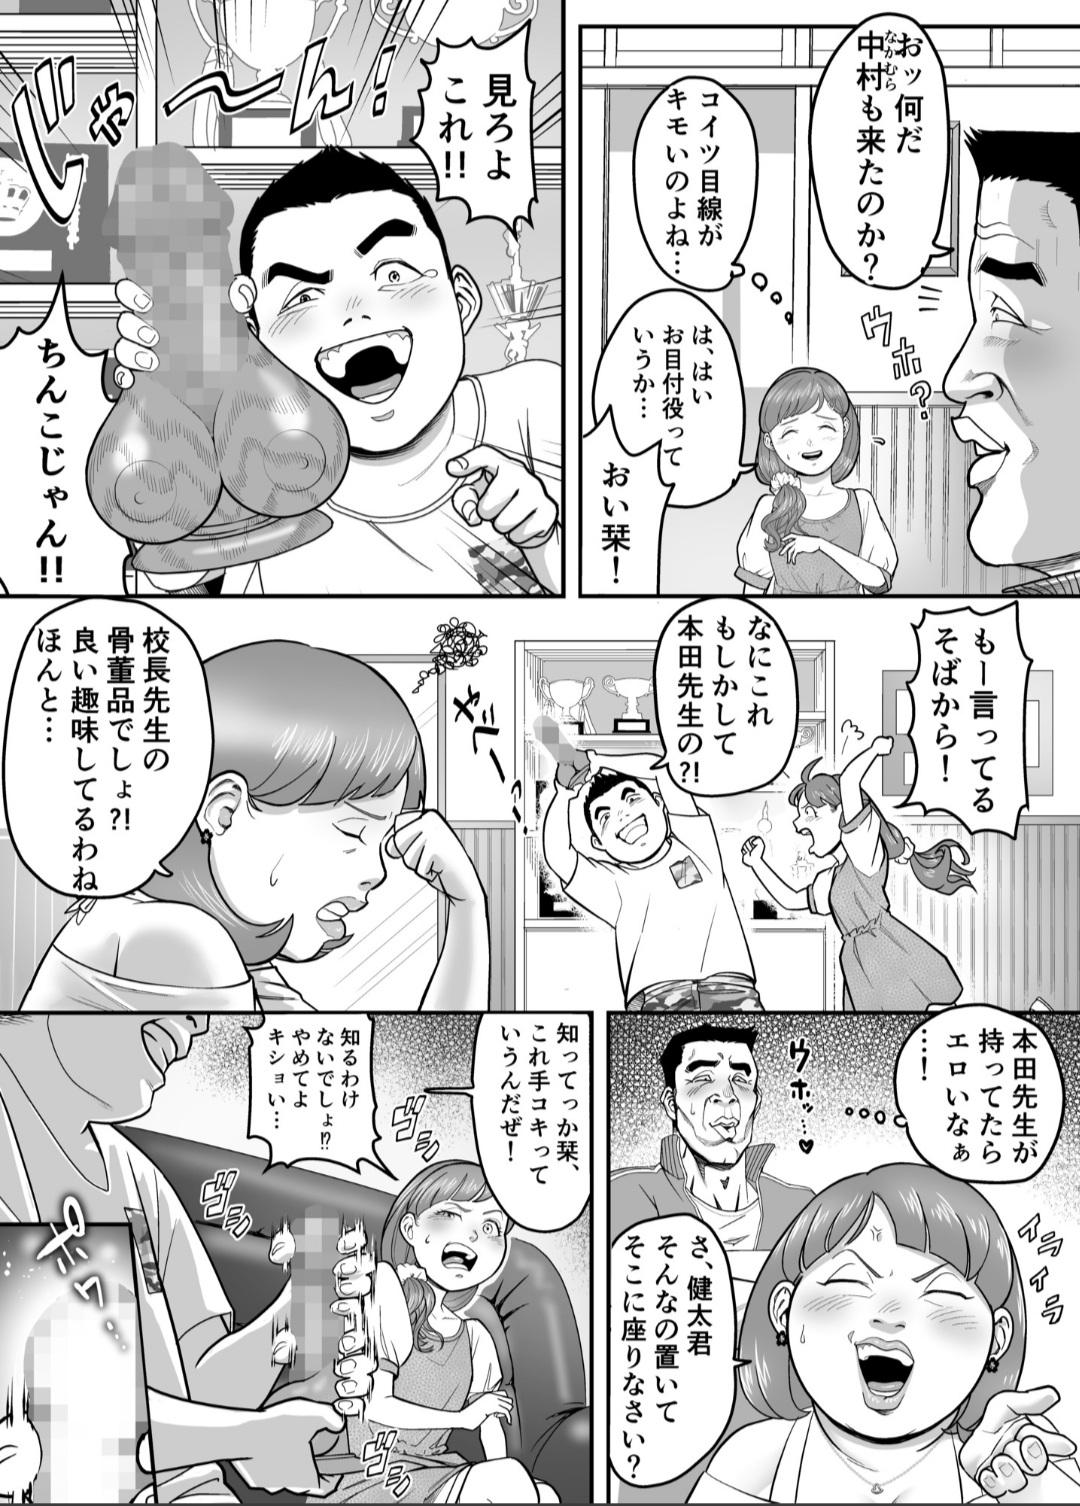 Infiel I've become Honda's Baba! Tight - Page 4